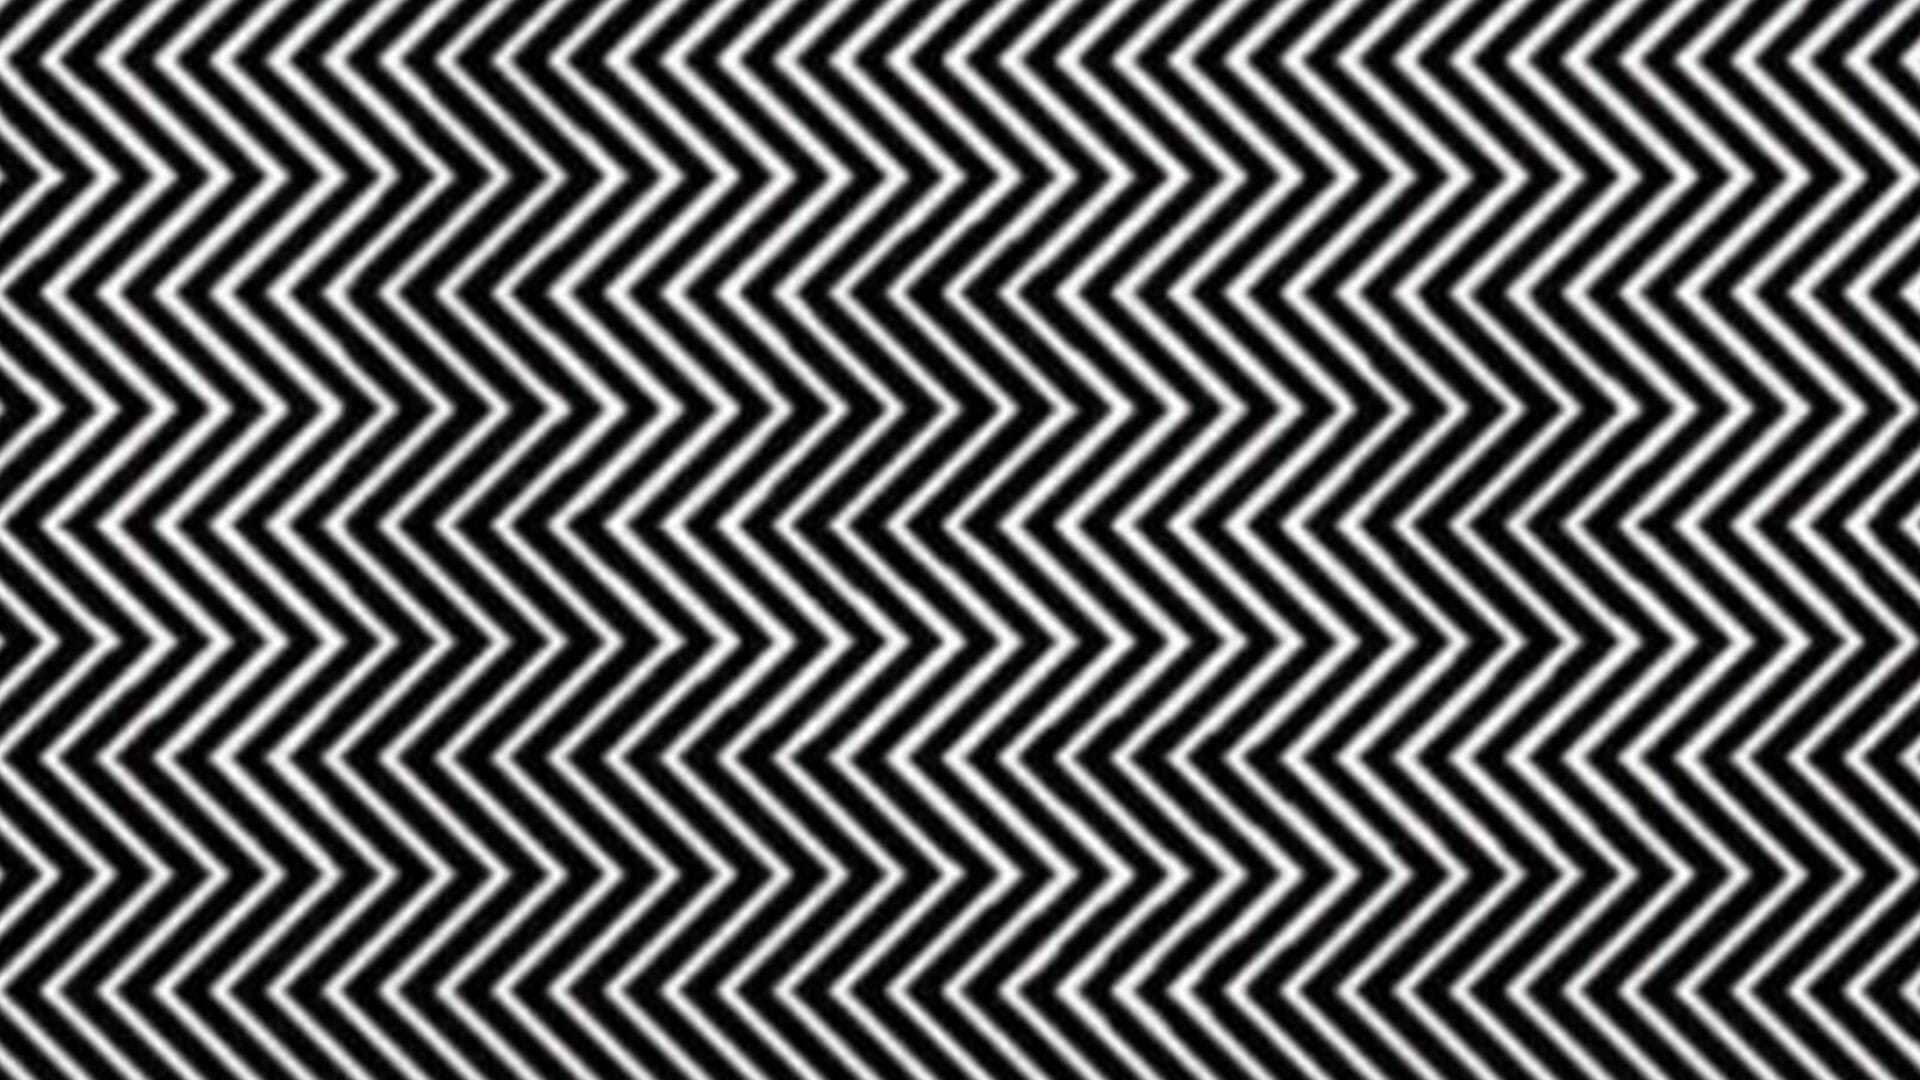 If you can find the hidden image in this optical illusion you’re in the top 1% - and there’s a clue to help you